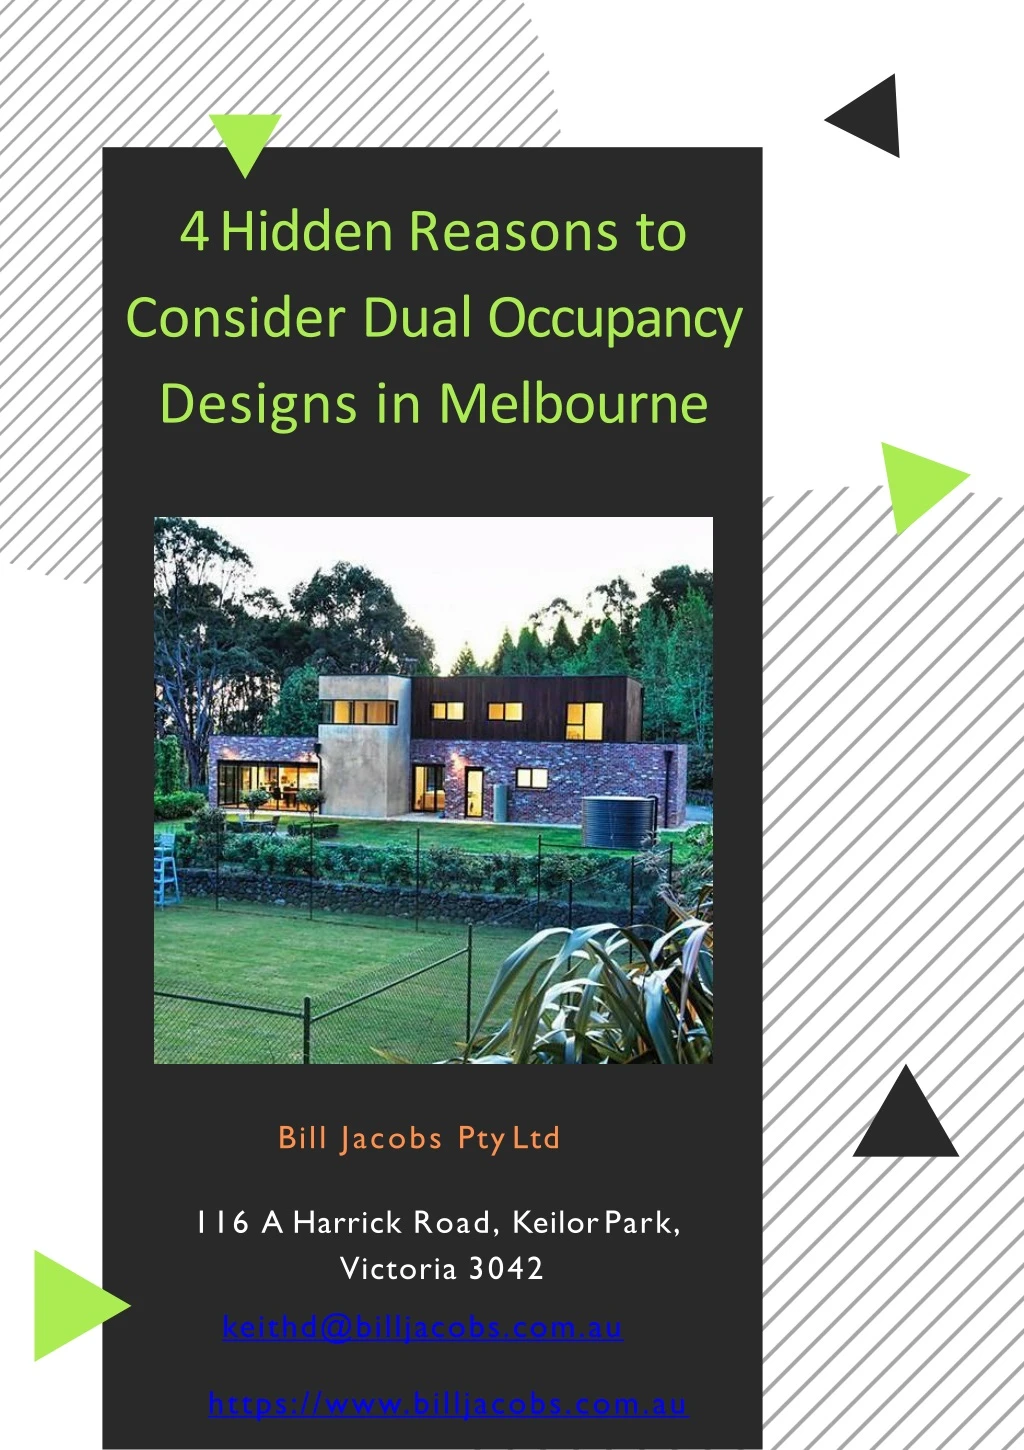 4 hidden reasons to consider dual occupancy designs in melbourne